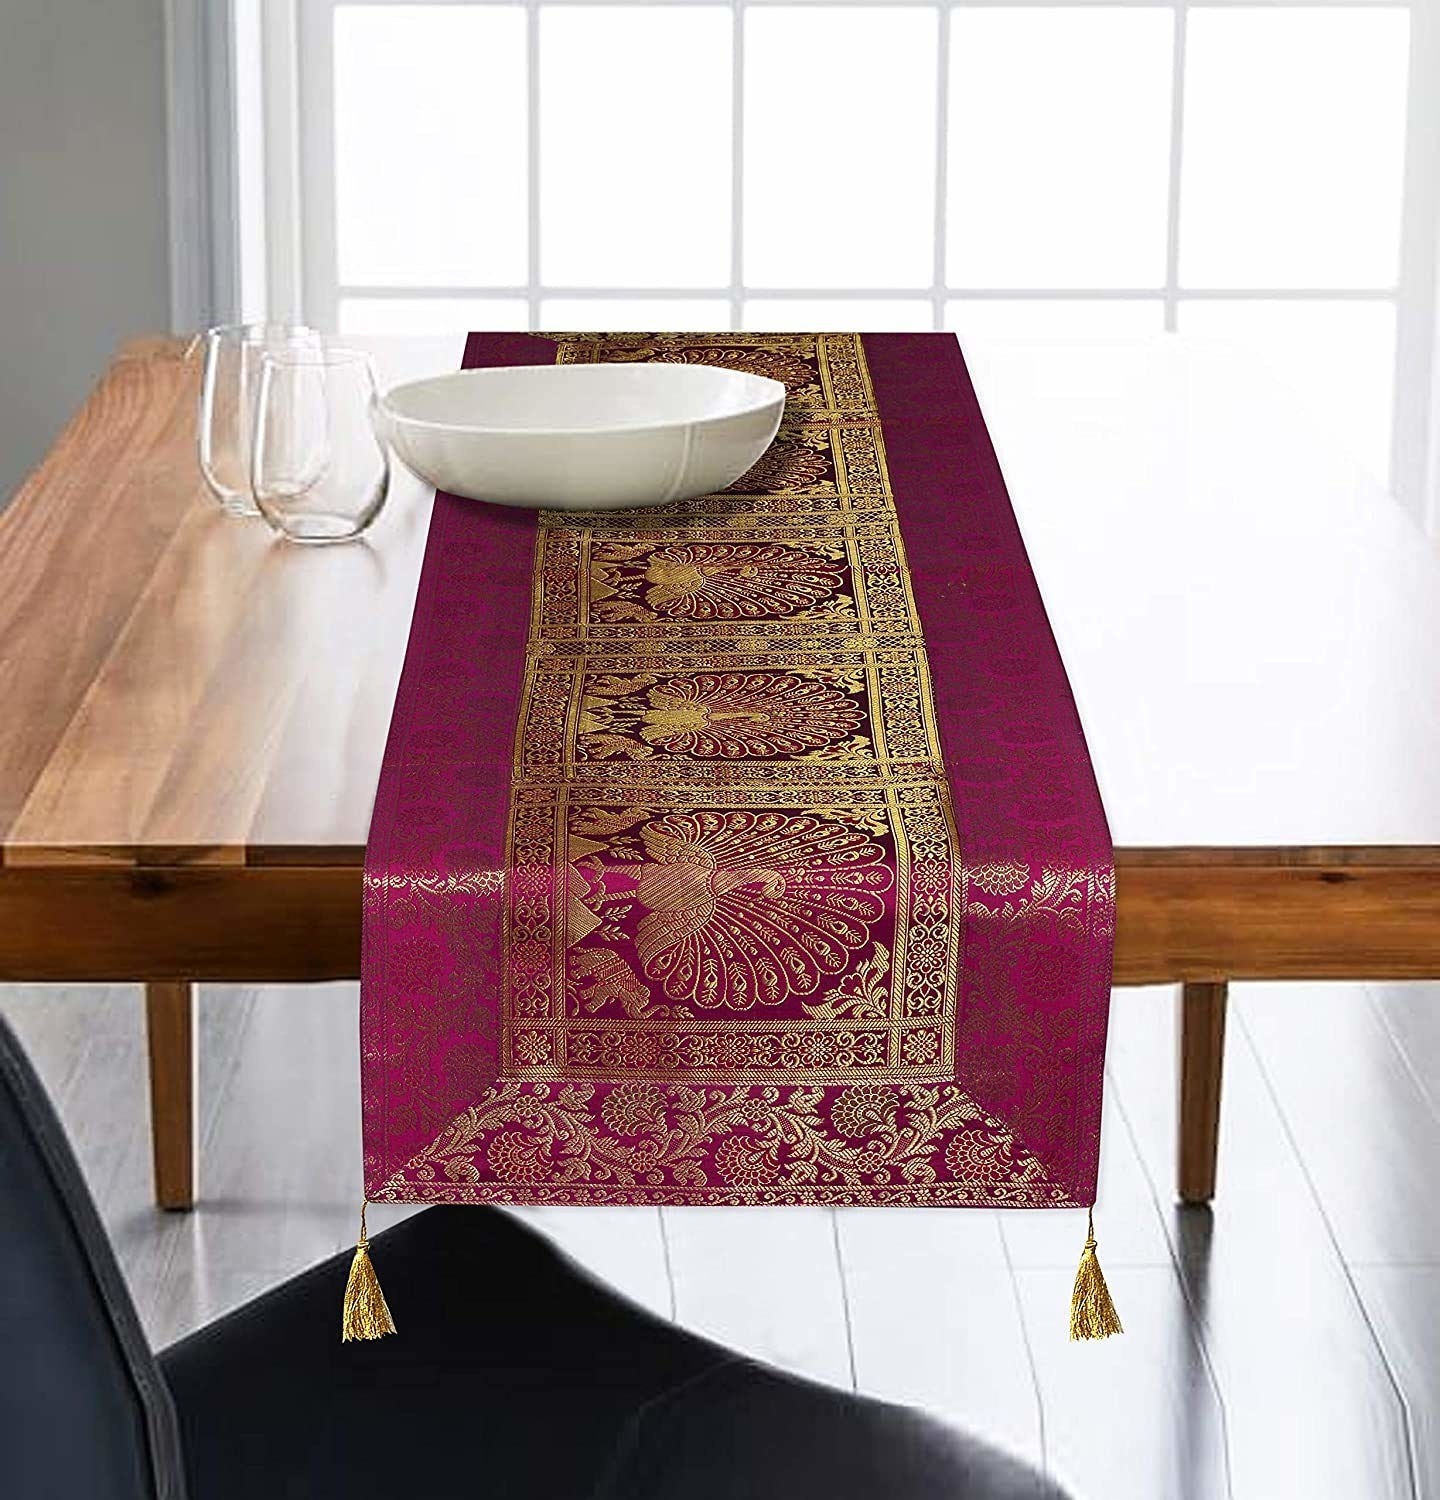 A pink table runner on a table